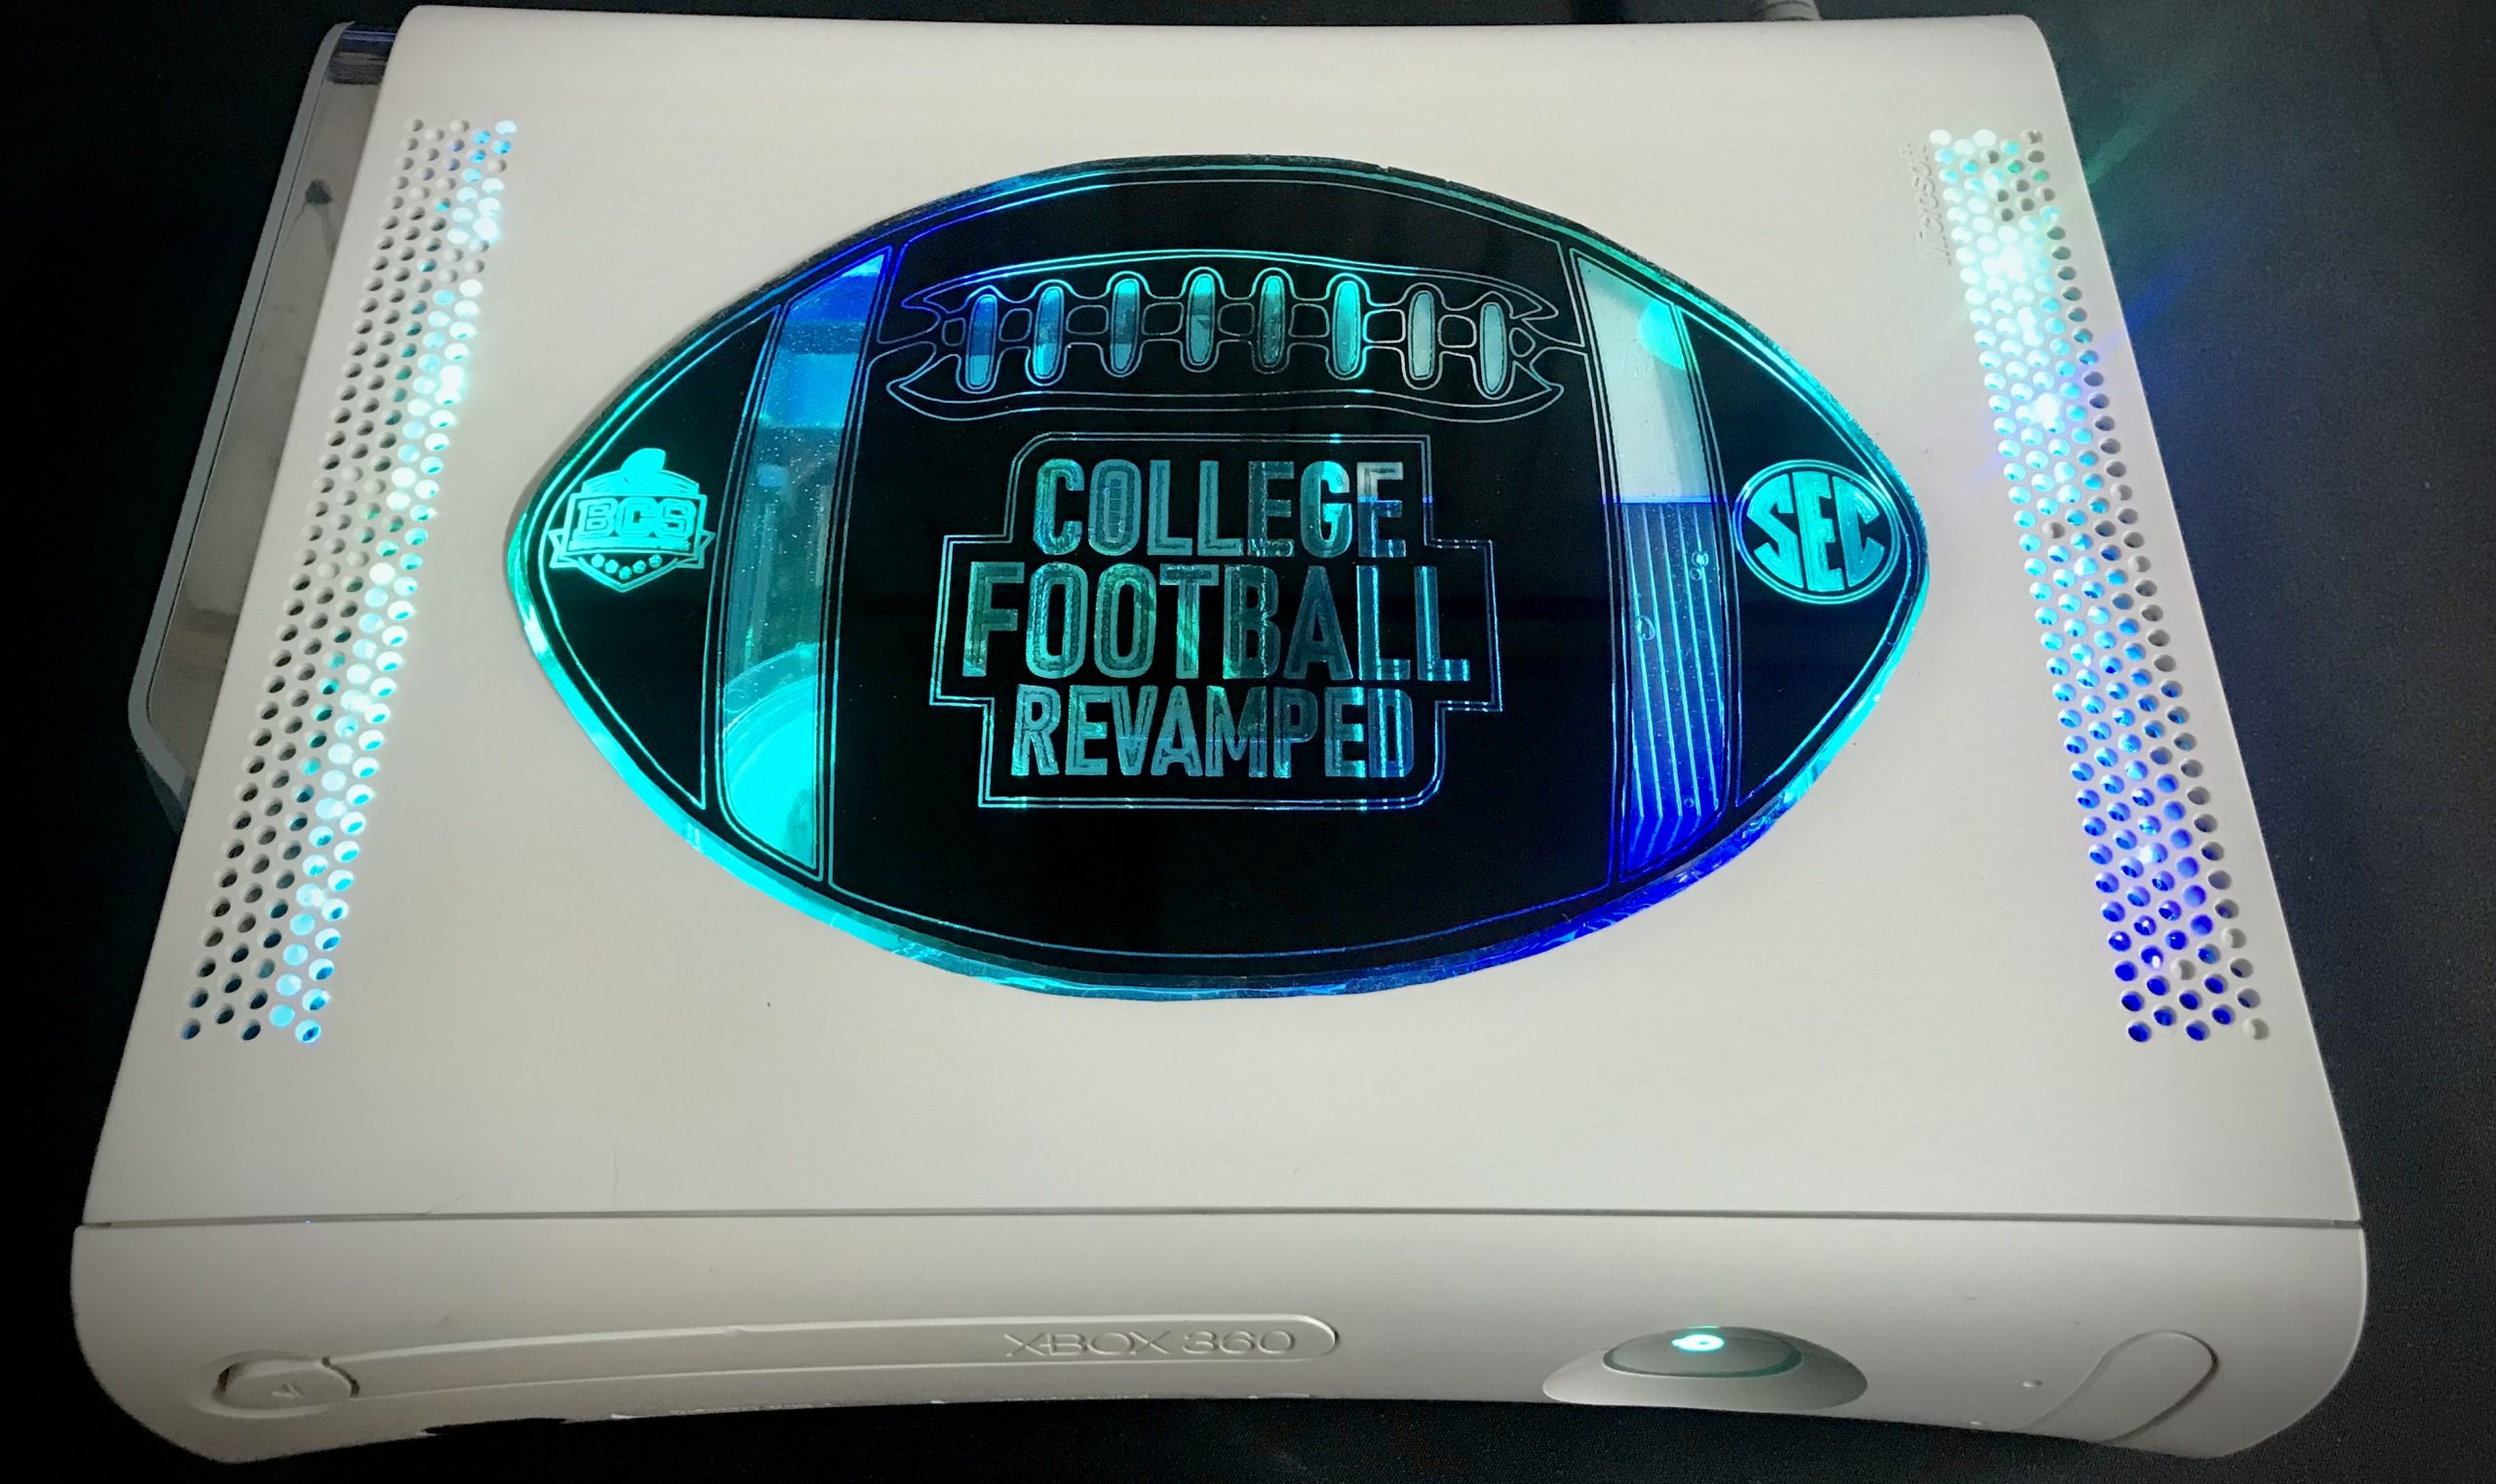 1 TB SSD Xbox 360 Rgh/jtag Only College Football Revamped 20.1